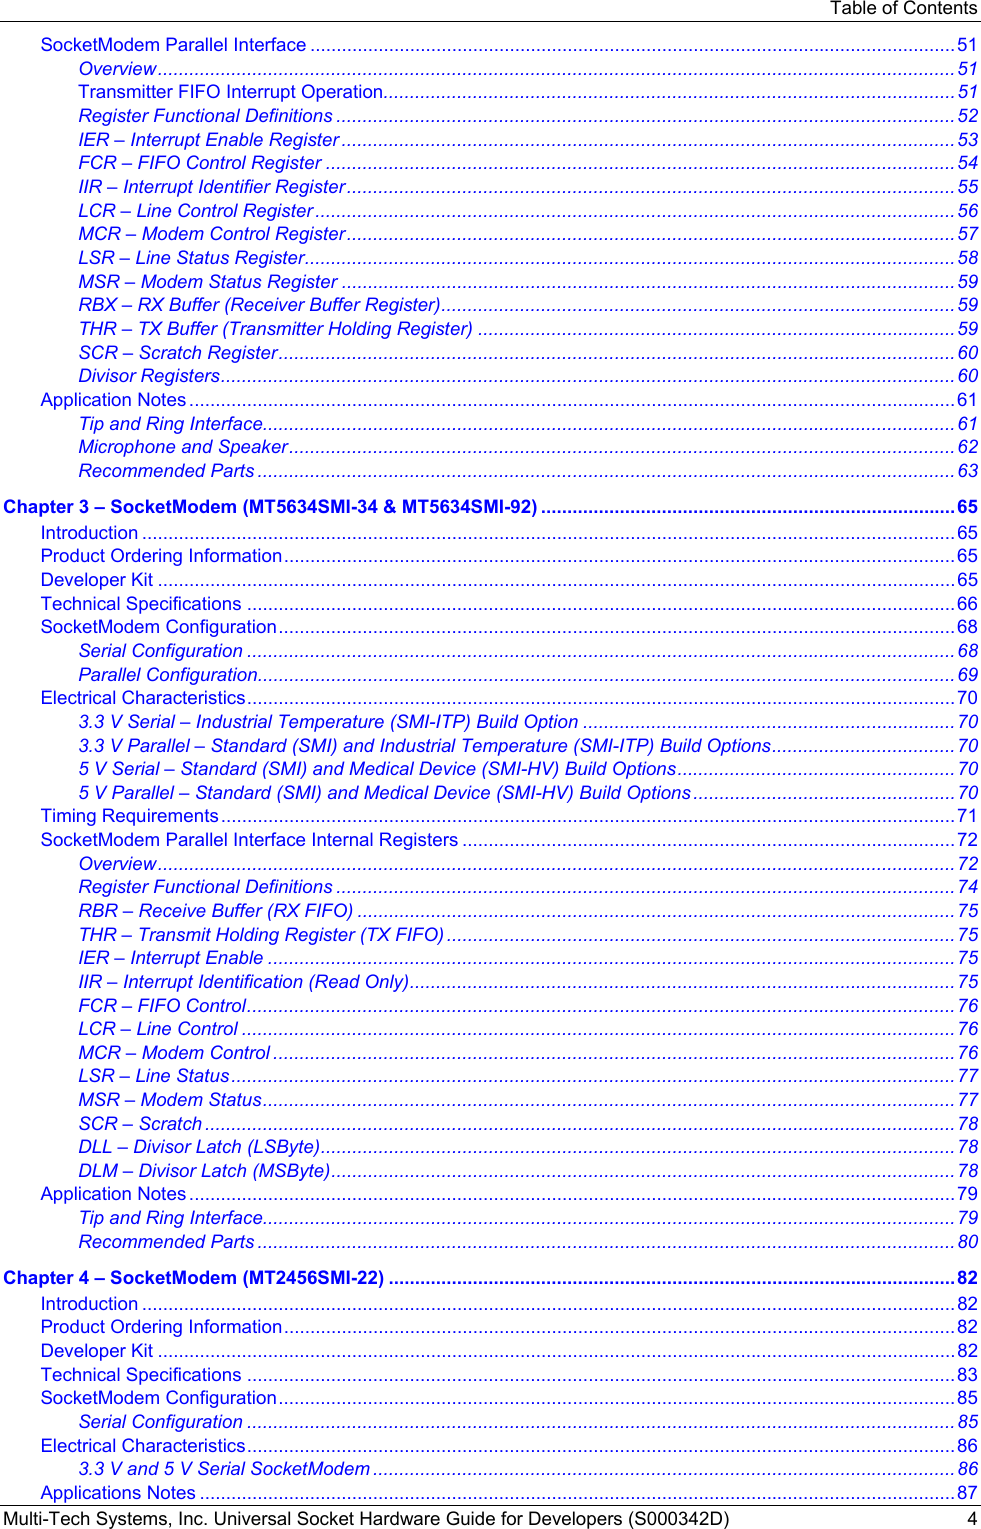 Table of Contents Multi-Tech Systems, Inc. Universal Socket Hardware Guide for Developers (S000342D)  4 SocketModem Parallel Interface ...........................................................................................................................51 Overview........................................................................................................................................................51 Transmitter FIFO Interrupt Operation.............................................................................................................51 Register Functional Definitions ......................................................................................................................52 IER – Interrupt Enable Register .....................................................................................................................53 FCR – FIFO Control Register ........................................................................................................................54 IIR – Interrupt Identifier Register....................................................................................................................55 LCR – Line Control Register ..........................................................................................................................56 MCR – Modem Control Register....................................................................................................................57 LSR – Line Status Register............................................................................................................................58 MSR – Modem Status Register .....................................................................................................................59 RBX – RX Buffer (Receiver Buffer Register)..................................................................................................59 THR – TX Buffer (Transmitter Holding Register) ...........................................................................................59 SCR – Scratch Register.................................................................................................................................60 Divisor Registers............................................................................................................................................60 Application Notes ..................................................................................................................................................61 Tip and Ring Interface....................................................................................................................................61 Microphone and Speaker...............................................................................................................................62 Recommended Parts .....................................................................................................................................63 Chapter 3 – SocketModem (MT5634SMI-34 &amp; MT5634SMI-92) ...............................................................................65 Introduction ...........................................................................................................................................................65 Product Ordering Information................................................................................................................................65 Developer Kit ........................................................................................................................................................65 Technical Specifications .......................................................................................................................................66 SocketModem Configuration.................................................................................................................................68 Serial Configuration .......................................................................................................................................68 Parallel Configuration.....................................................................................................................................69 Electrical Characteristics.......................................................................................................................................70 3.3 V Serial – Industrial Temperature (SMI-ITP) Build Option .......................................................................70 3.3 V Parallel – Standard (SMI) and Industrial Temperature (SMI-ITP) Build Options...................................70 5 V Serial – Standard (SMI) and Medical Device (SMI-HV) Build Options.....................................................70 5 V Parallel – Standard (SMI) and Medical Device (SMI-HV) Build Options ..................................................70 Timing Requirements............................................................................................................................................71 SocketModem Parallel Interface Internal Registers ..............................................................................................72 Overview........................................................................................................................................................72 Register Functional Definitions ......................................................................................................................74 RBR – Receive Buffer (RX FIFO) ..................................................................................................................75 THR – Transmit Holding Register (TX FIFO) .................................................................................................75 IER – Interrupt Enable ...................................................................................................................................75 IIR – Interrupt Identification (Read Only)........................................................................................................75 FCR – FIFO Control.......................................................................................................................................76 LCR – Line Control ........................................................................................................................................76 MCR – Modem Control ..................................................................................................................................76 LSR – Line Status..........................................................................................................................................77 MSR – Modem Status....................................................................................................................................77 SCR – Scratch ...............................................................................................................................................78 DLL – Divisor Latch (LSByte).........................................................................................................................78 DLM – Divisor Latch (MSByte).......................................................................................................................78 Application Notes ..................................................................................................................................................79 Tip and Ring Interface....................................................................................................................................79 Recommended Parts .....................................................................................................................................80 Chapter 4 – SocketModem (MT2456SMI-22) ............................................................................................................82 Introduction ...........................................................................................................................................................82 Product Ordering Information................................................................................................................................82 Developer Kit ........................................................................................................................................................82 Technical Specifications .......................................................................................................................................83 SocketModem Configuration.................................................................................................................................85 Serial Configuration .......................................................................................................................................85 Electrical Characteristics.......................................................................................................................................86 3.3 V and 5 V Serial SocketModem ...............................................................................................................86 Applications Notes ................................................................................................................................................87 